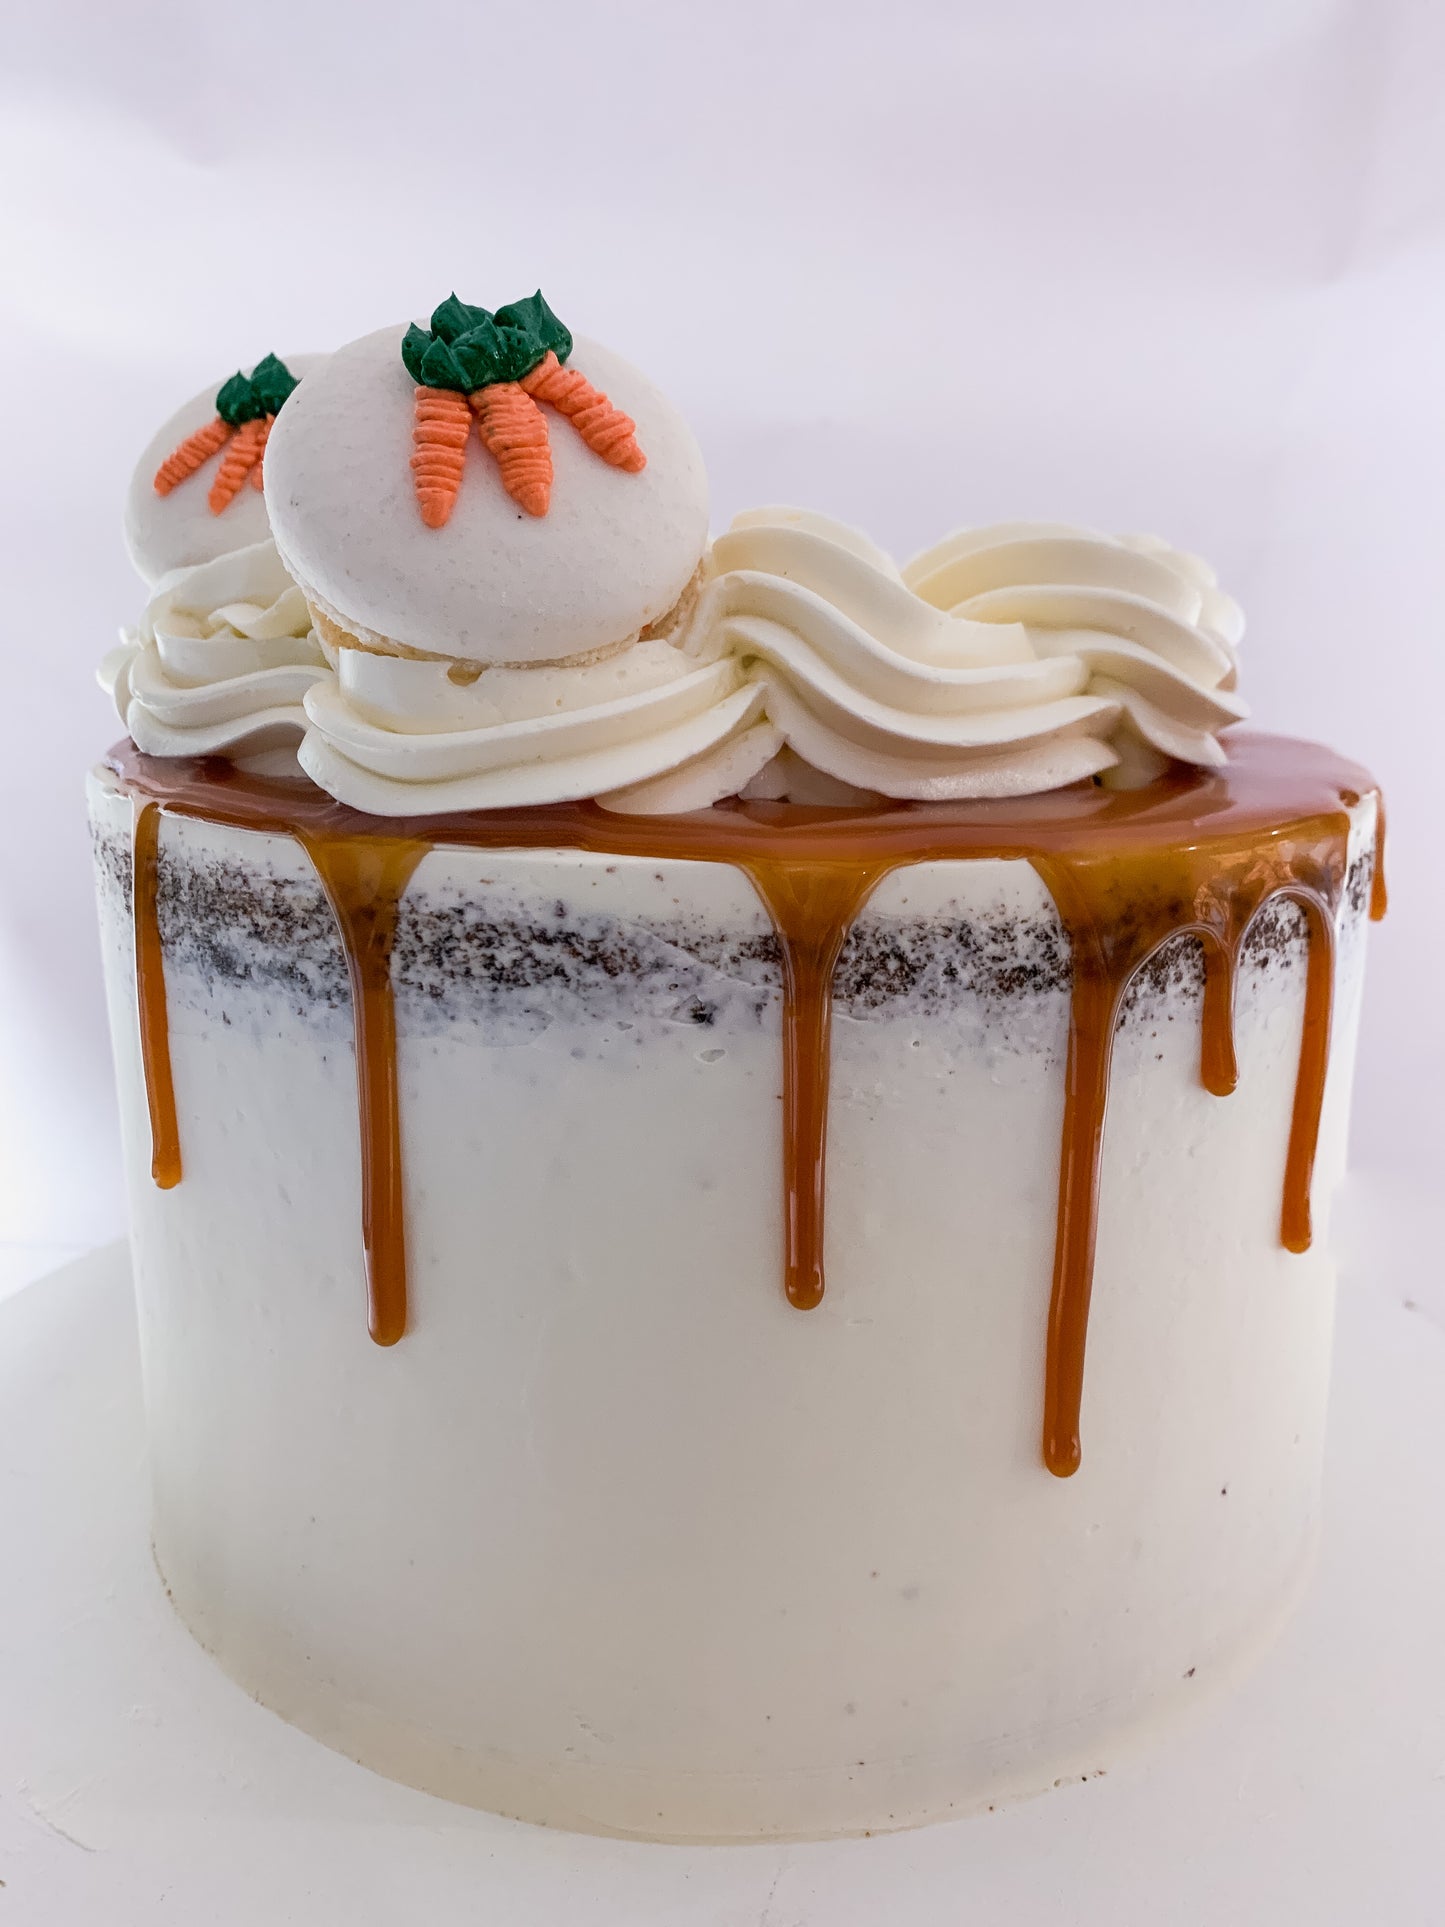 The Carrot Cake